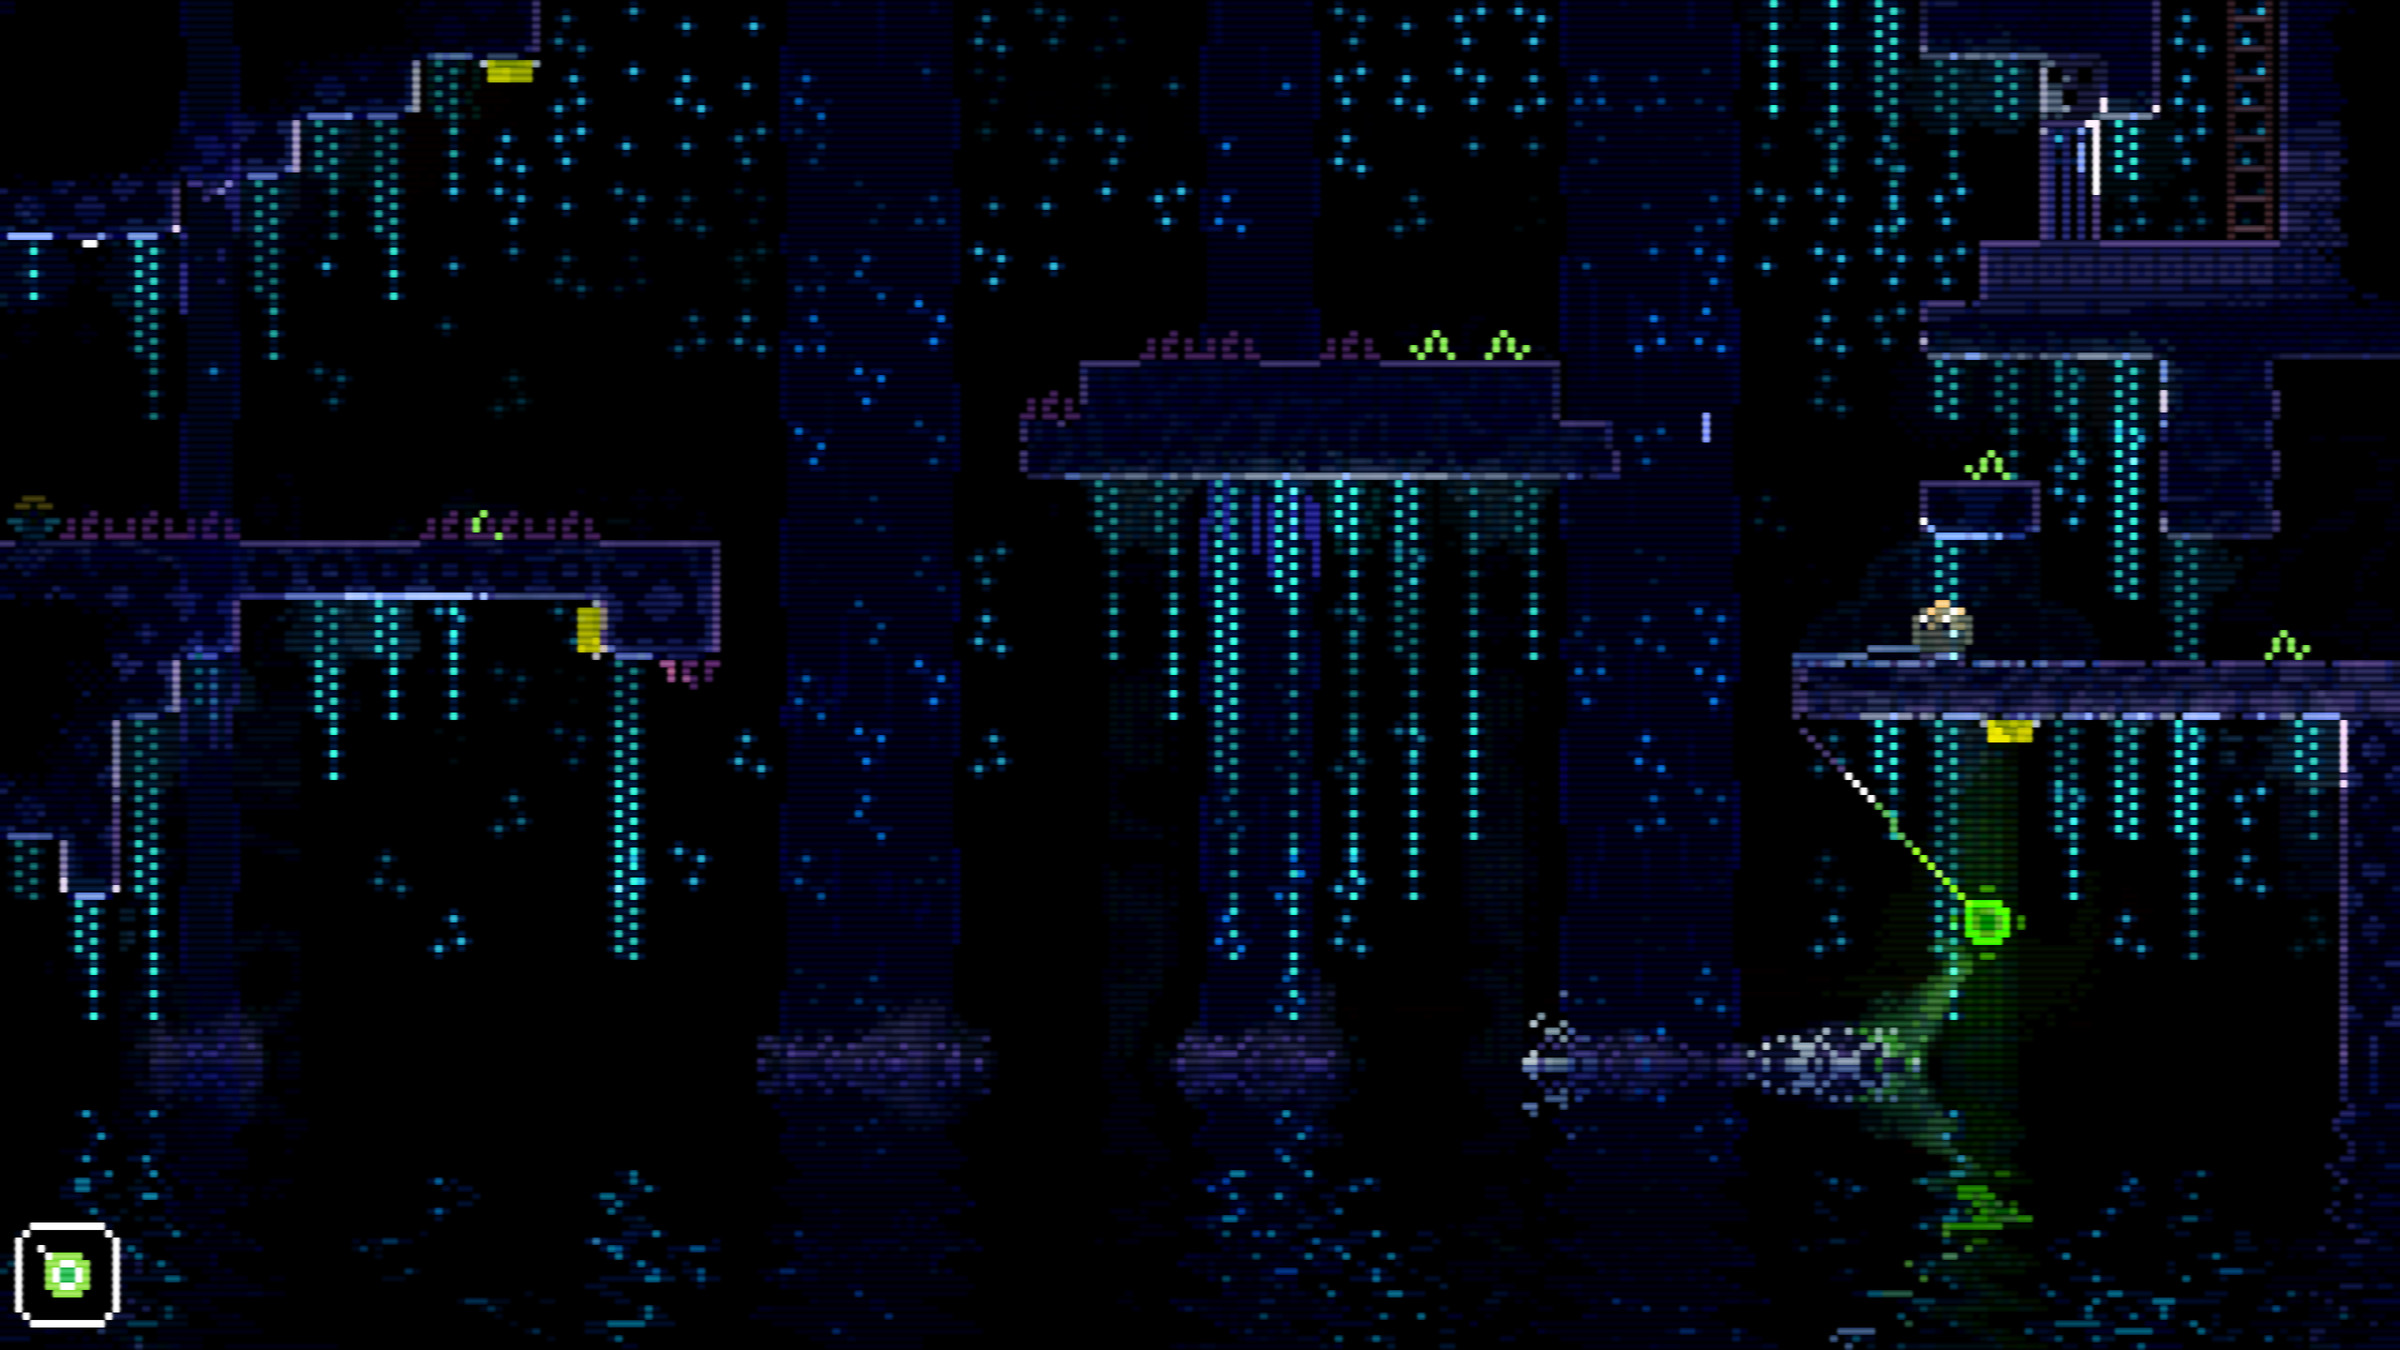 A screenshot from the video game Animal Well.